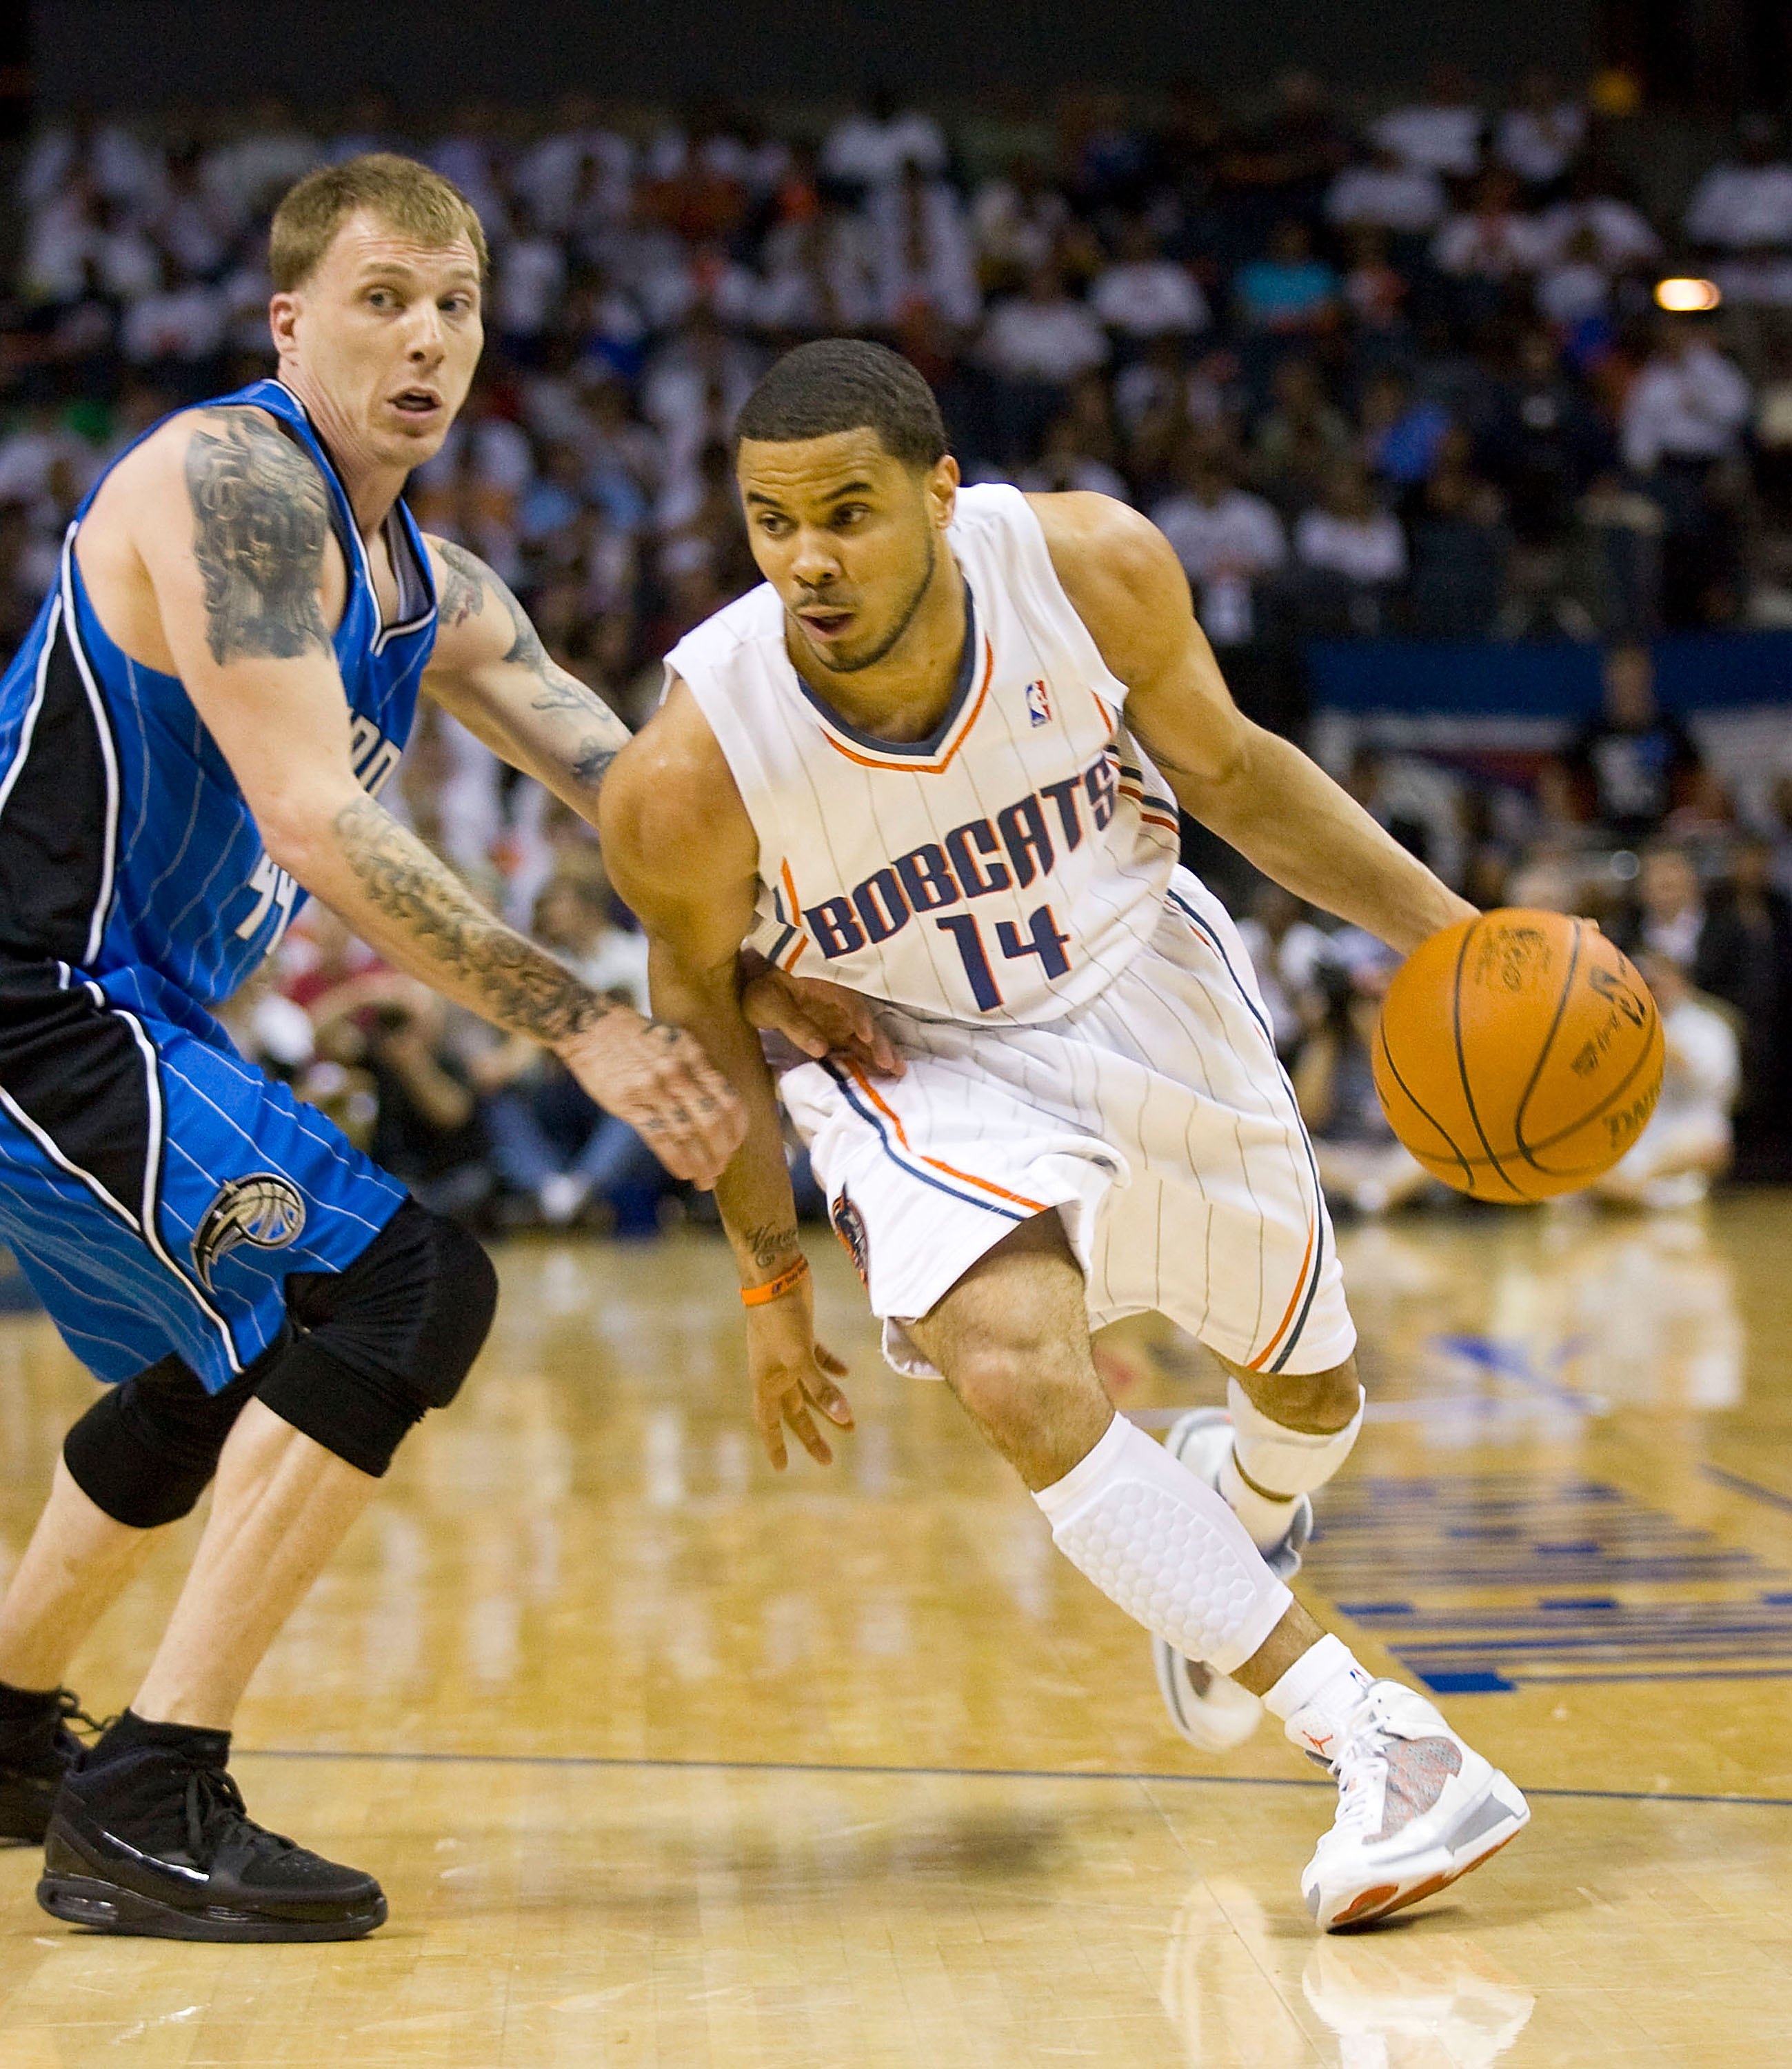 CHARLOTTE, NC - APRIL 26: D.J. Augustin #14 of the Charlotte Bobcats dribbles past Jason Williams #44 of the Orlando Magic at Time Warner Cable Arena on April 26, 2010 in Charlotte, North Carolina.  The Magic defeated the Bobcats 99-90 to complete the fou